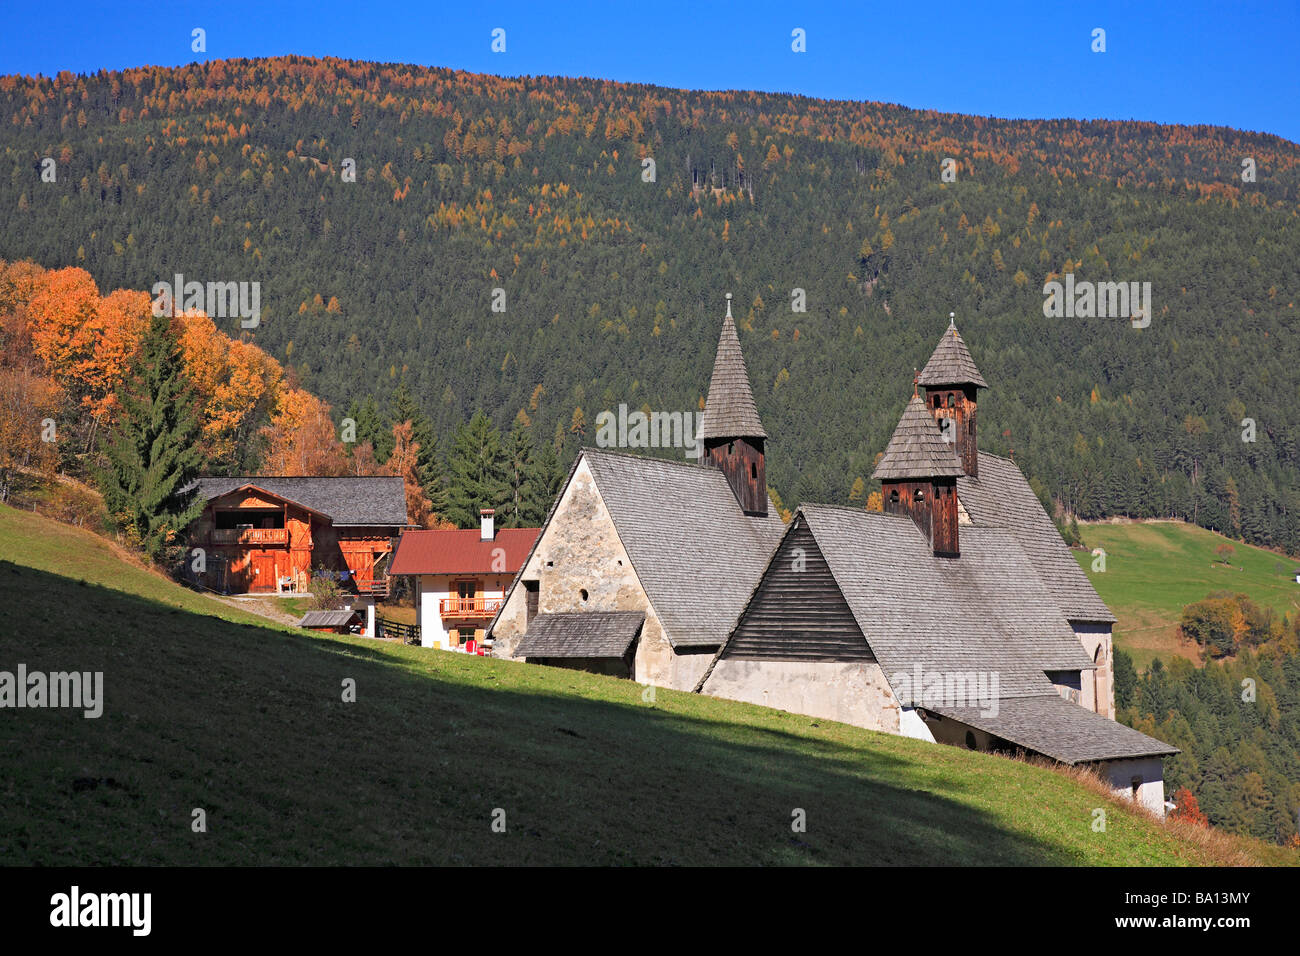 Village and churches of Bad Dreikirchen Tre Chiese Trentino Italy Stock Photo